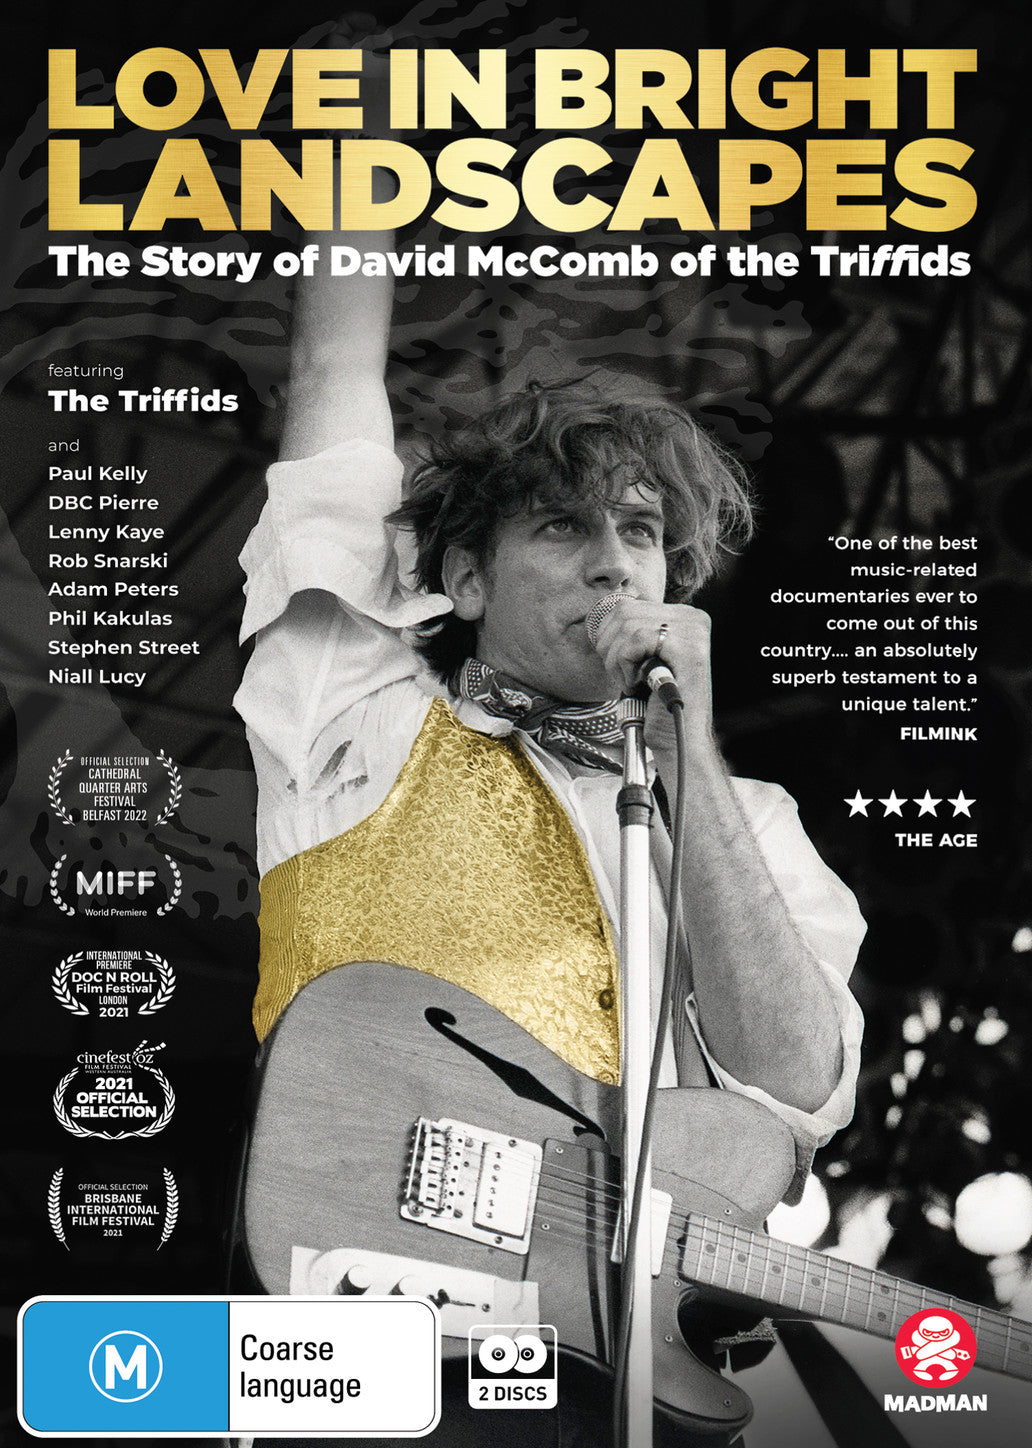 LOVE IN BRIGHT LANDSCAPES: THE STORY OF DAVID MCCOMB OF THE TRIFFIDS